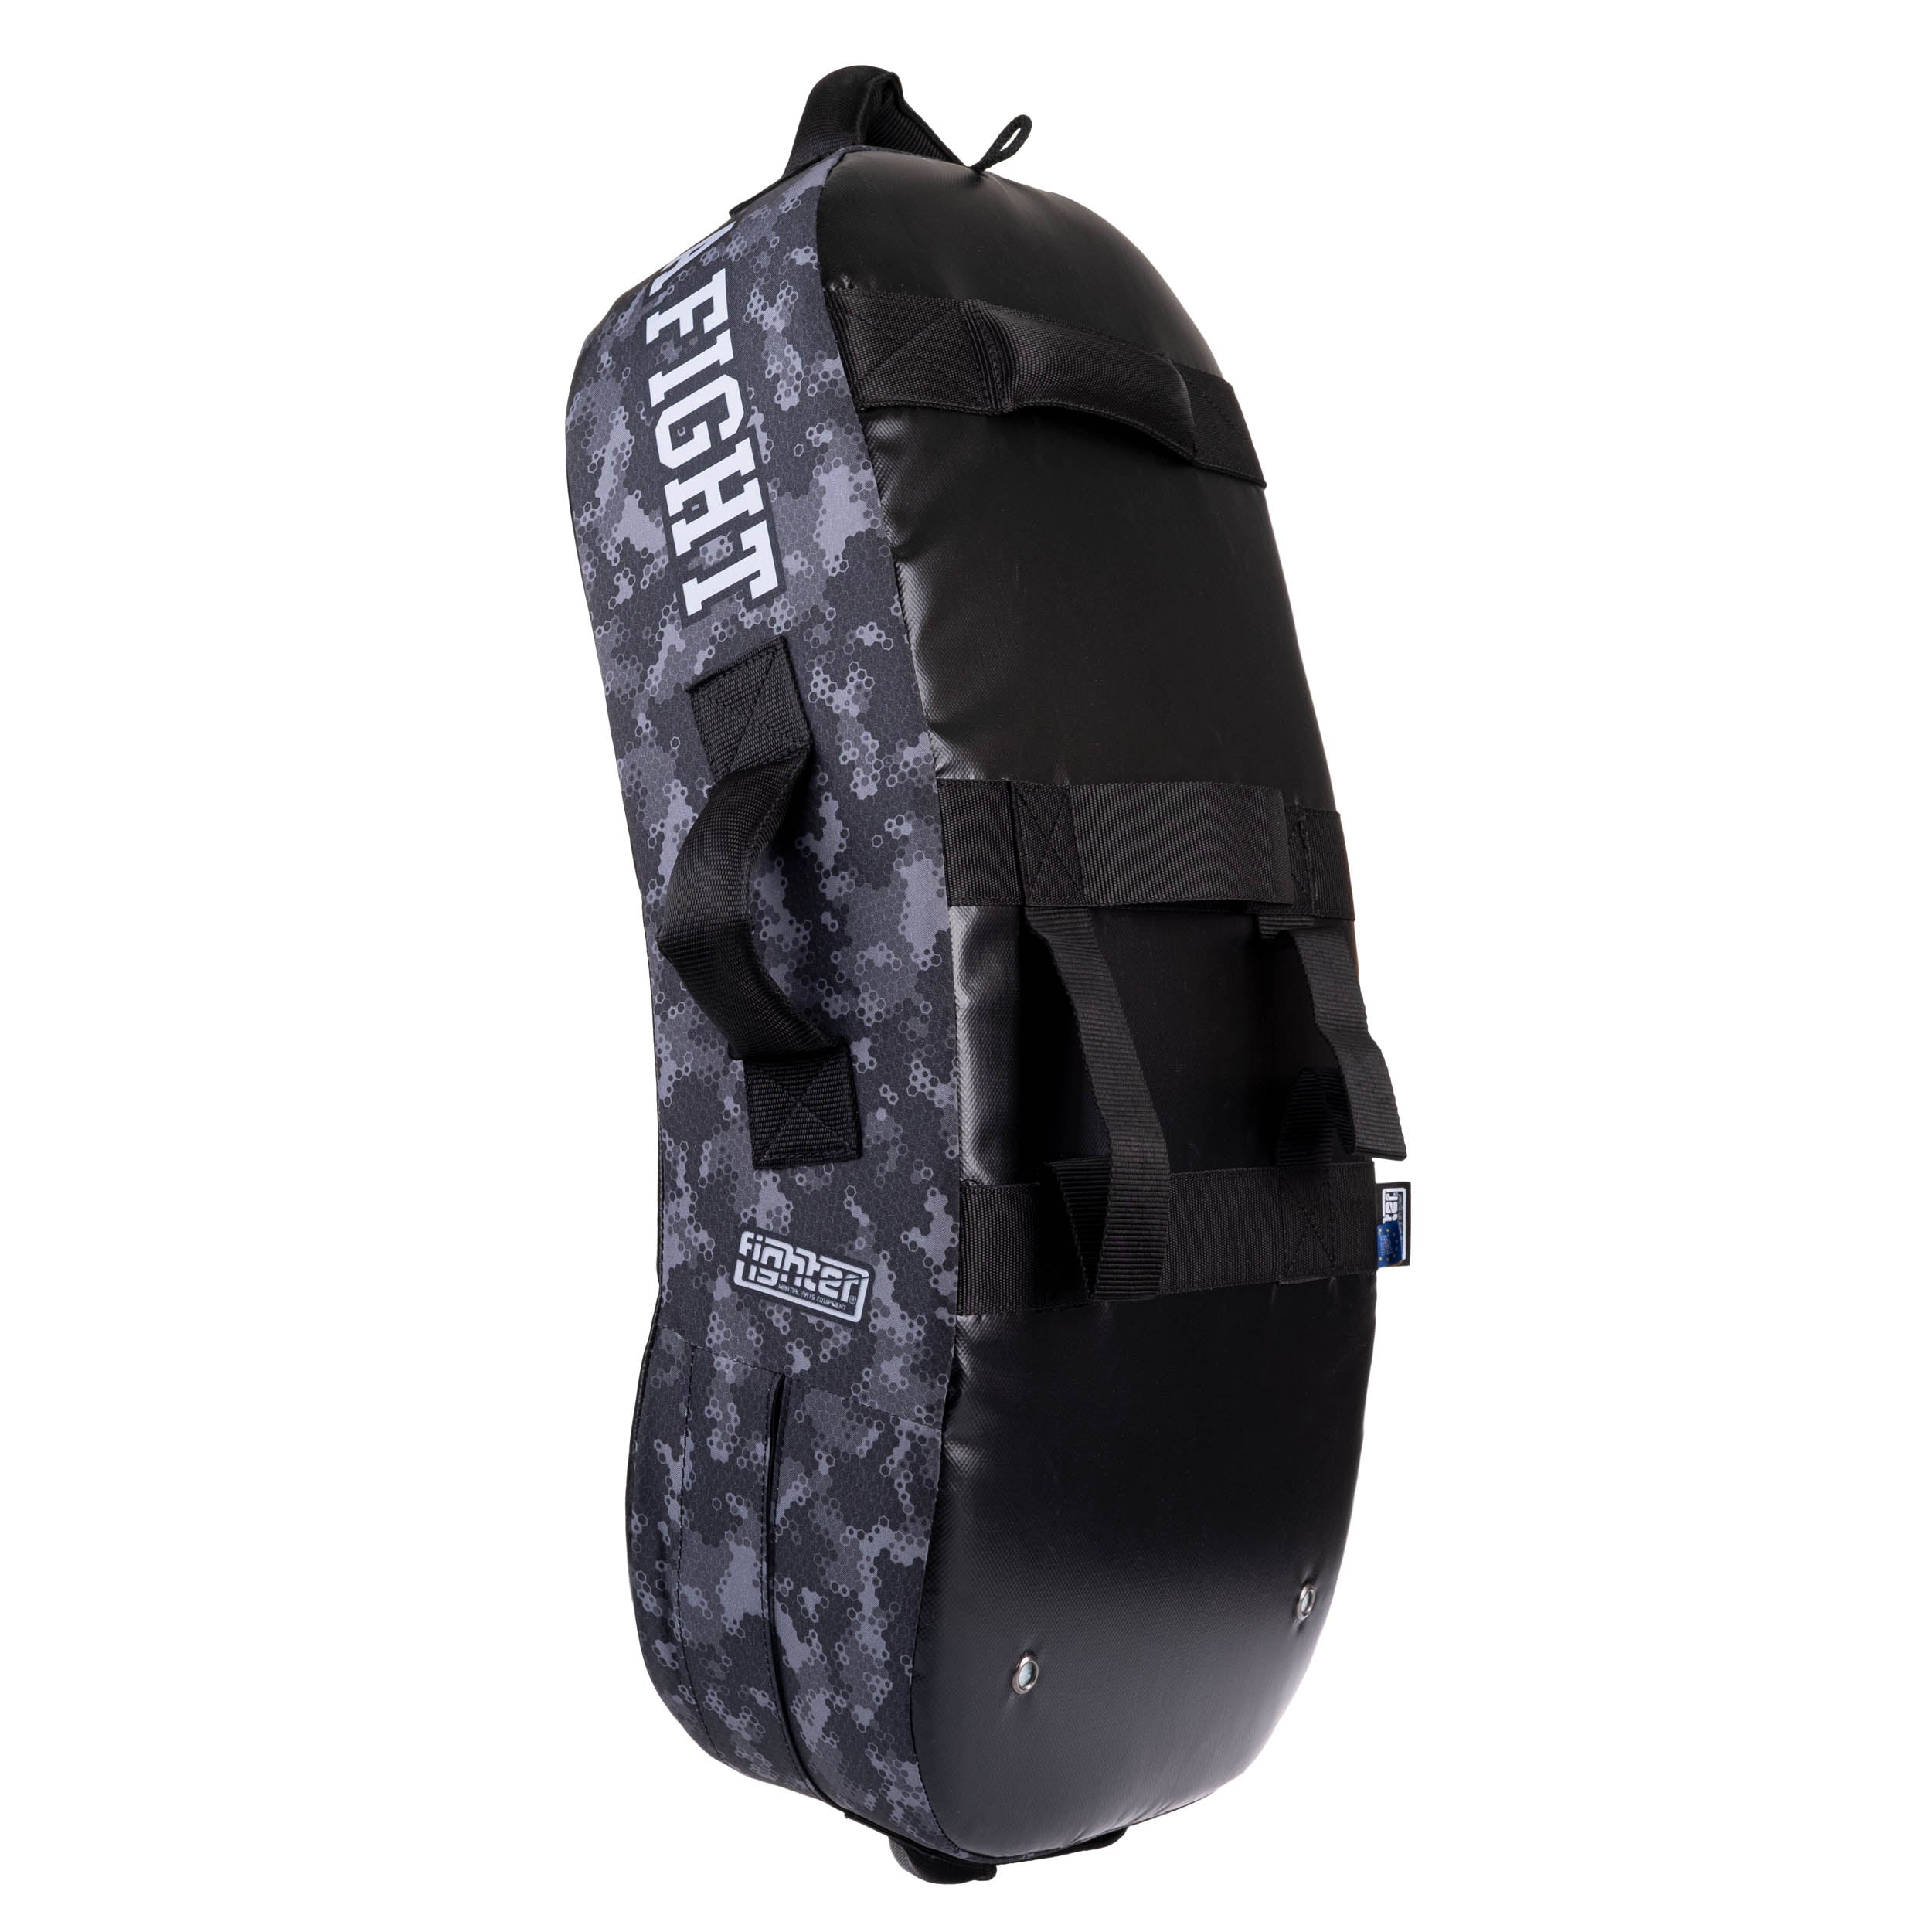 Fighter Kicking Shield - MULTI GRIP - Life is a Fight - Gray Camo, FKSH-29